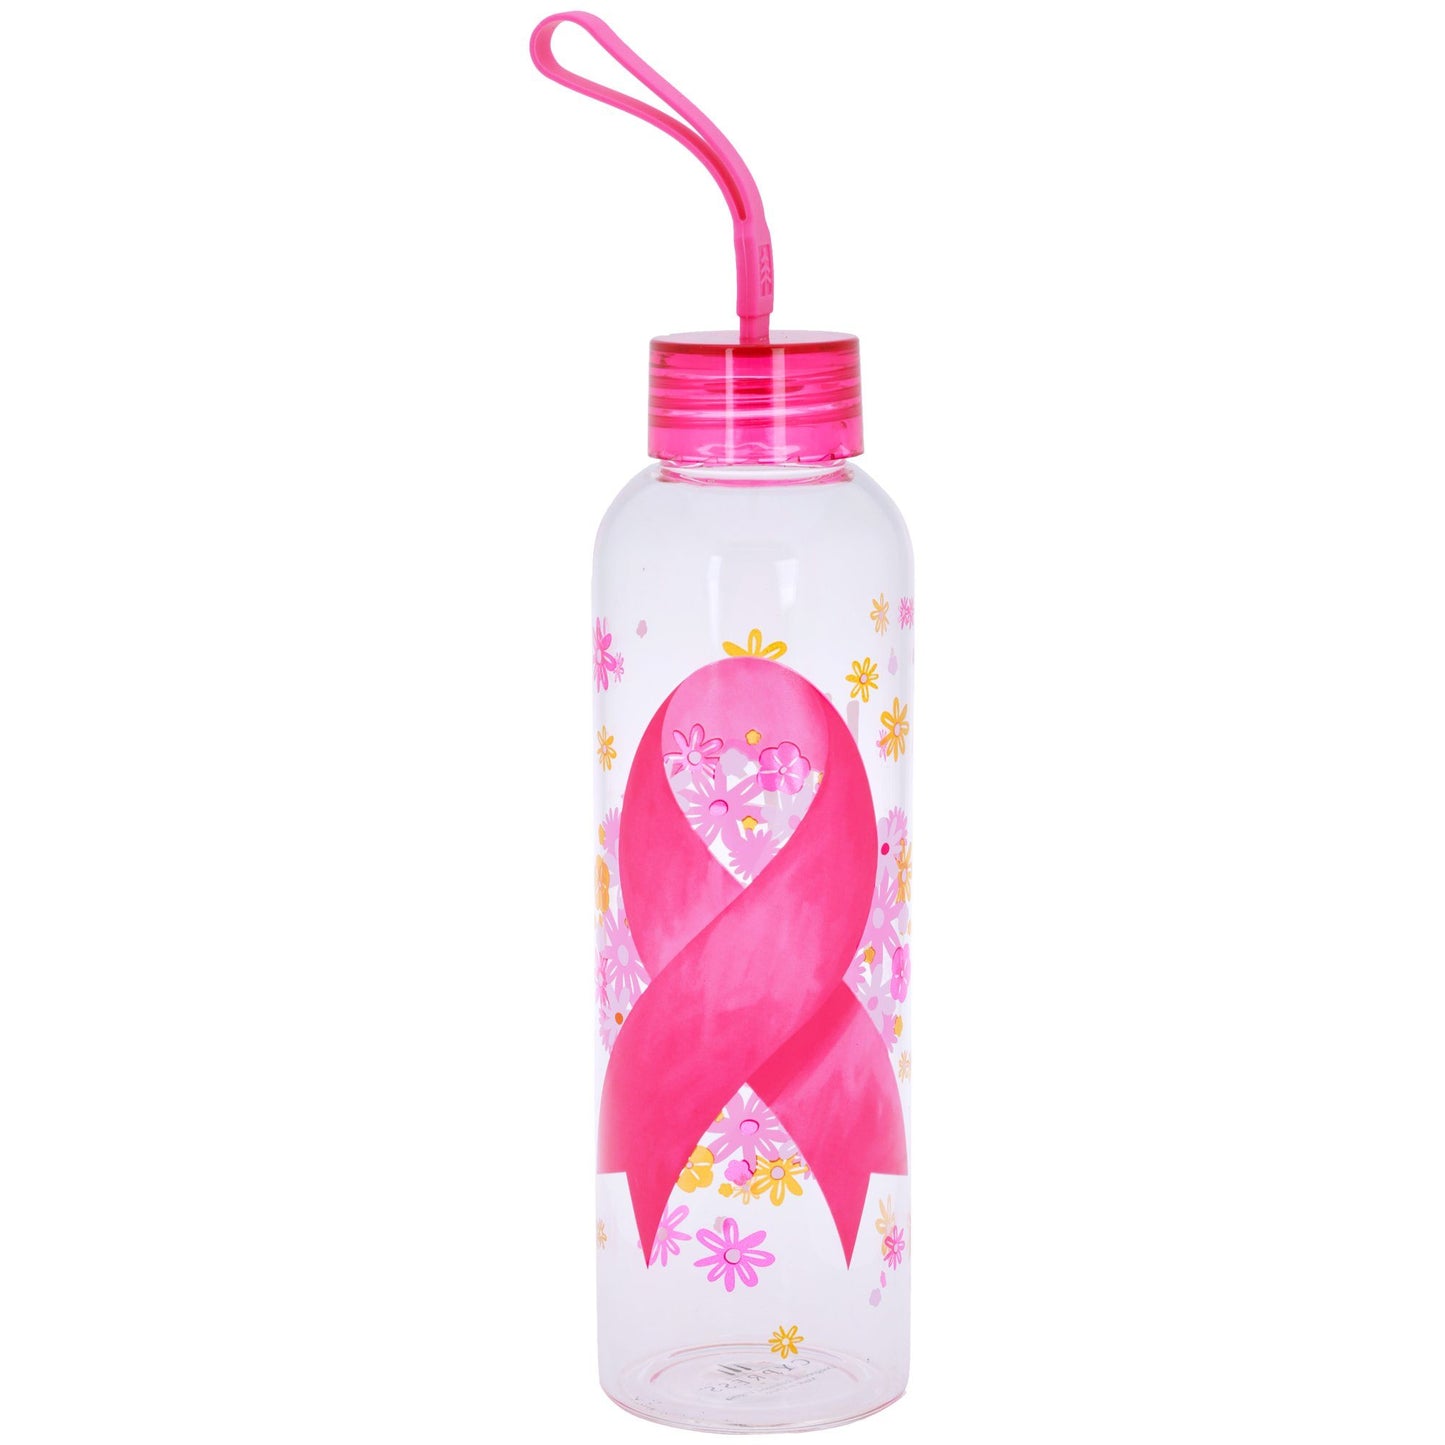 Hope Strength Courage Glass Water Bottle